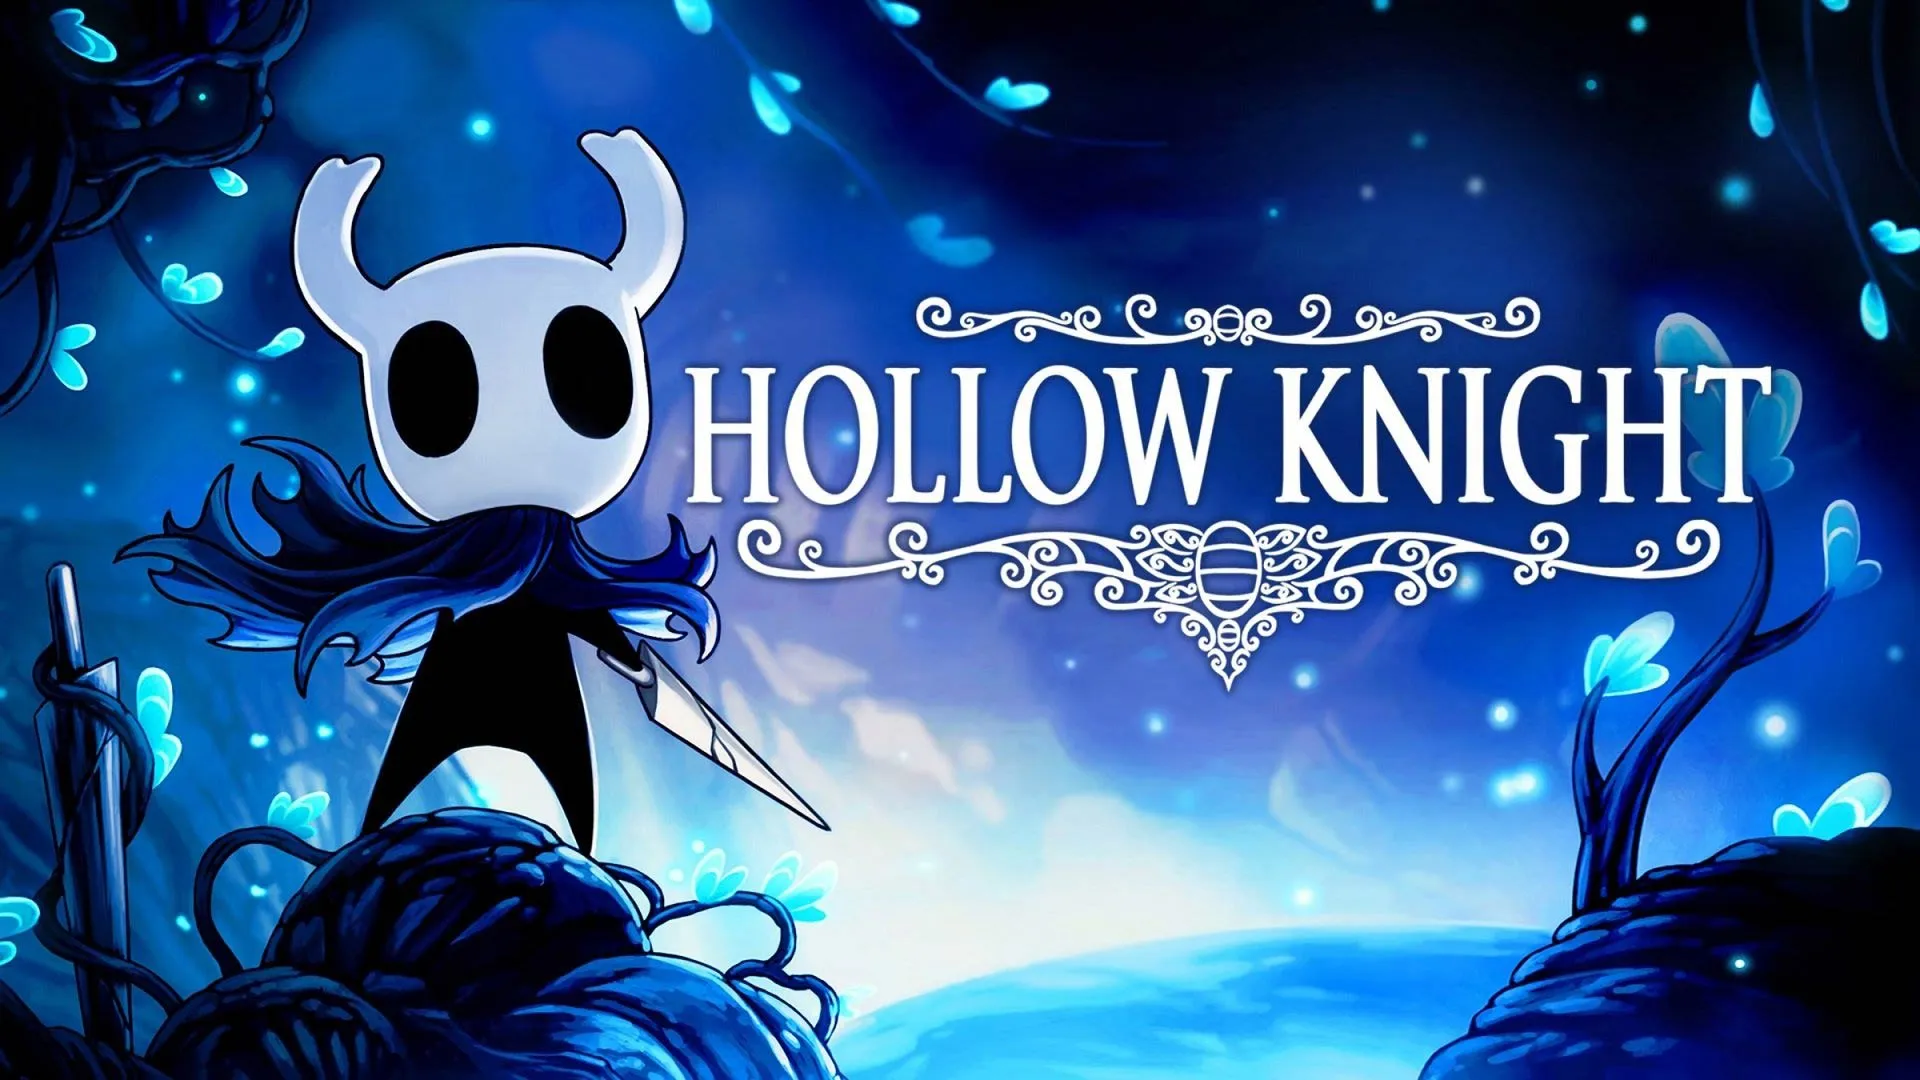 Hollow Knight lore